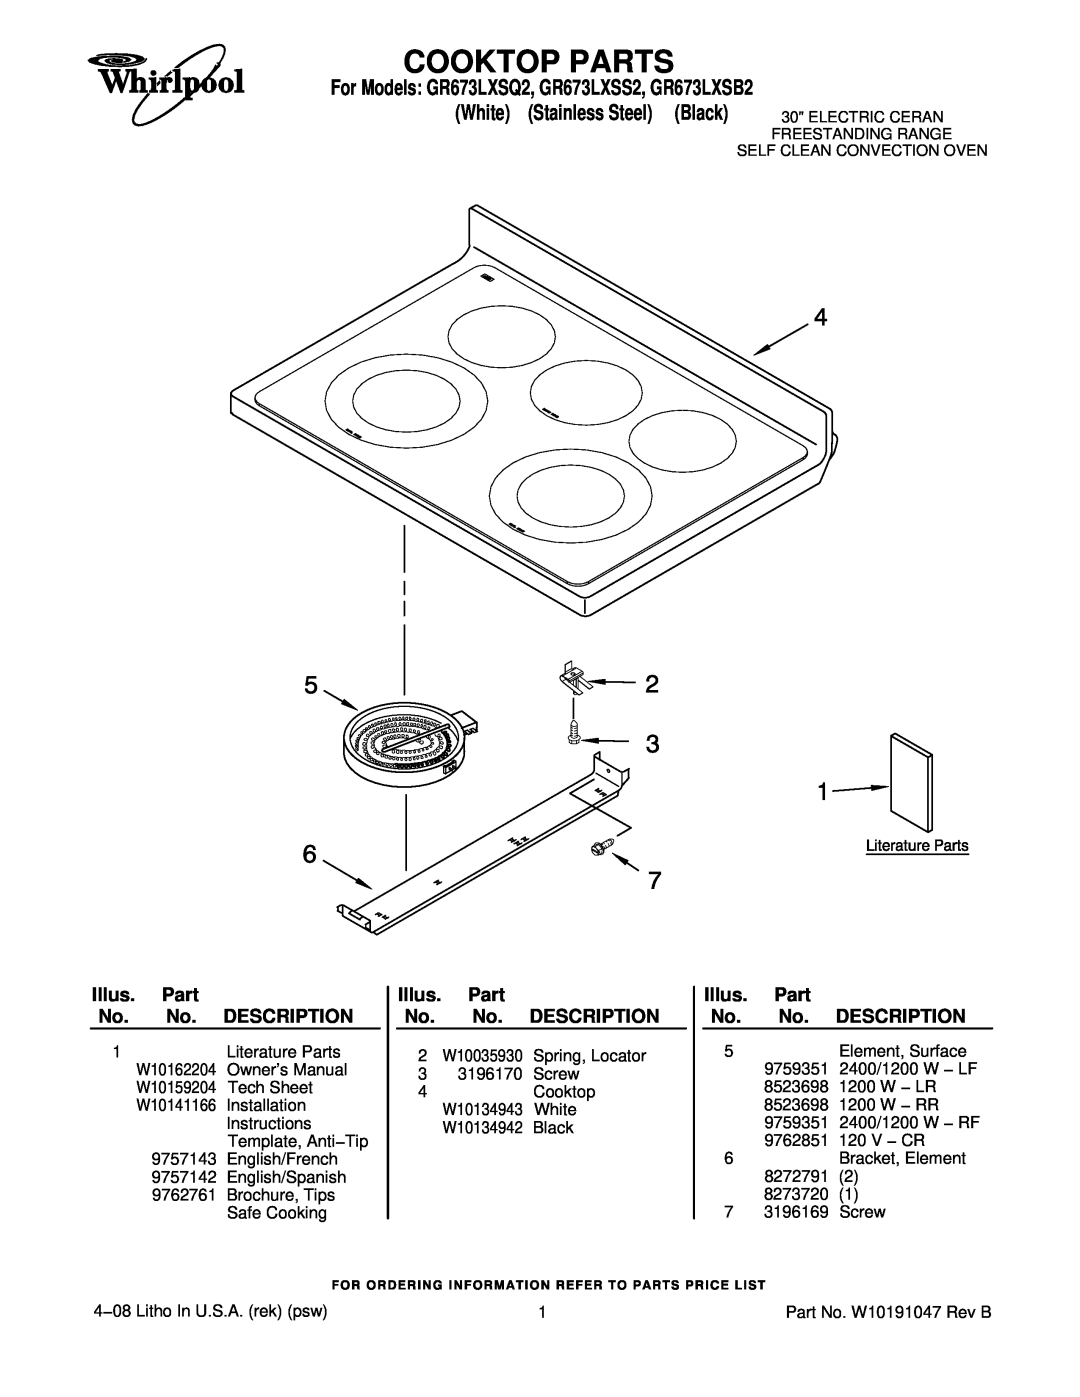 Whirlpool owner manual Cooktop Parts, For Models GR673LXSQ2, GR673LXSS2, GR673LXSB2, White Stainless Steel Black 